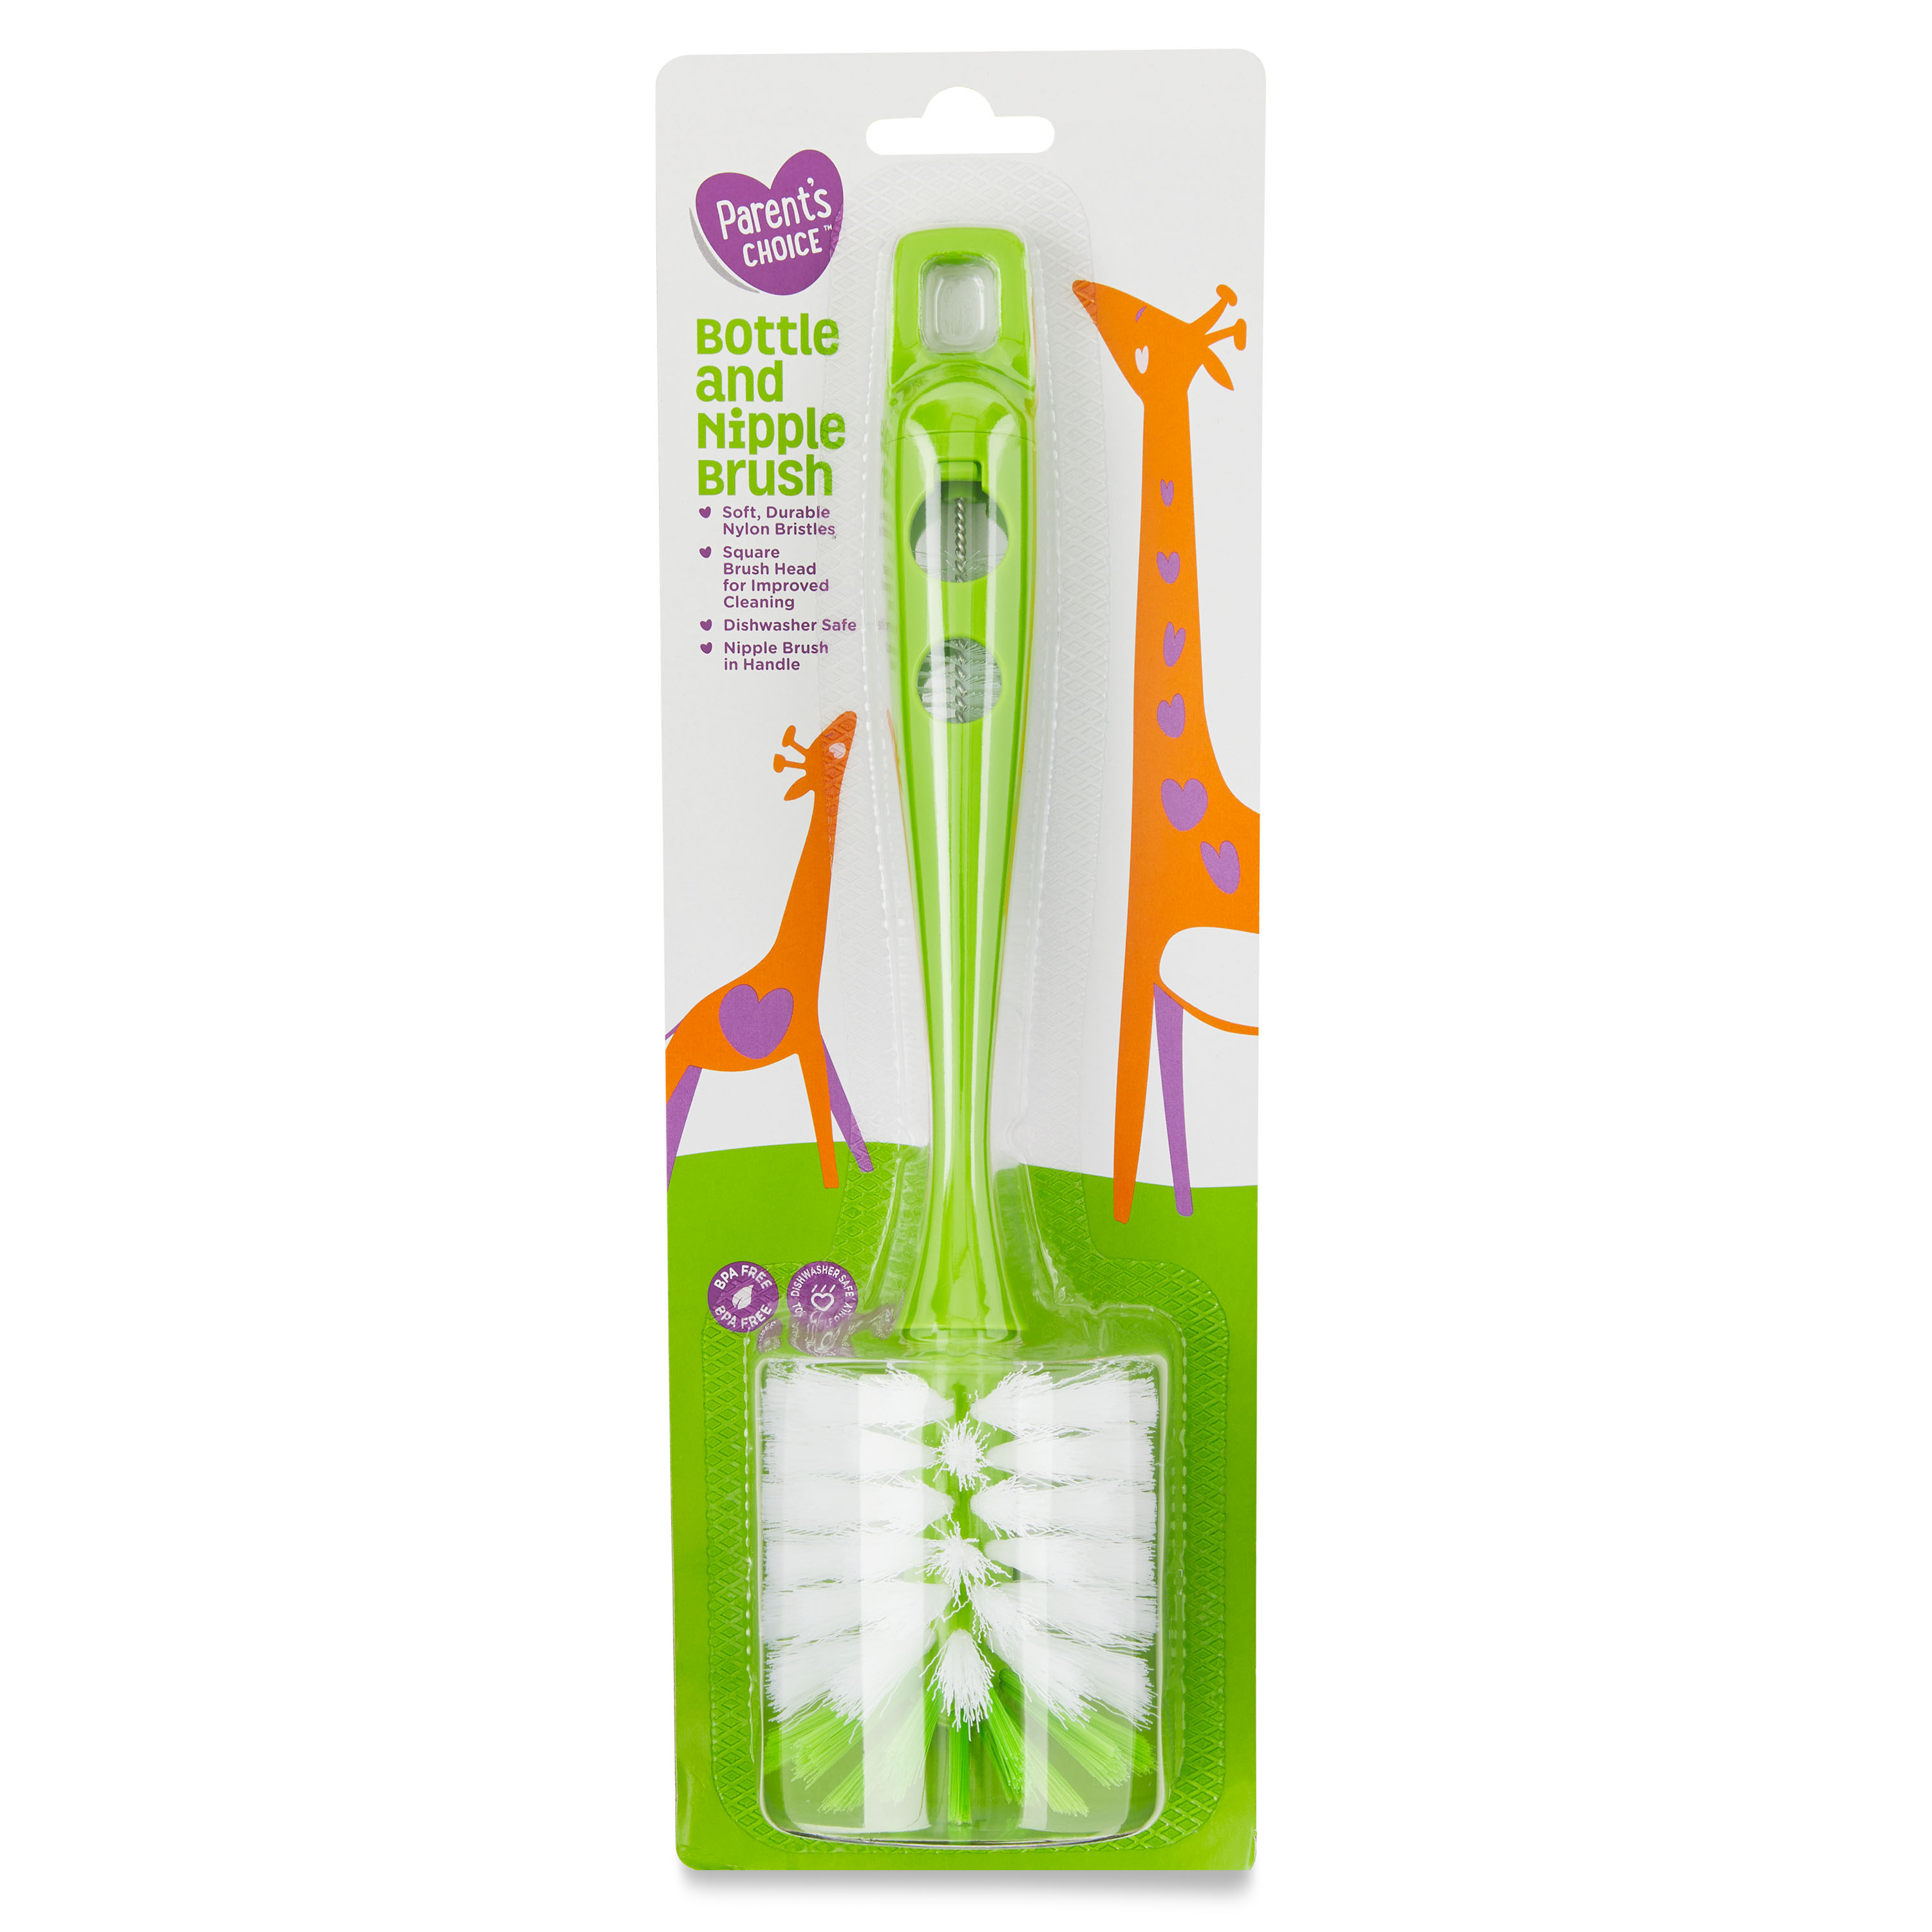 Parents Choice White & Green Bottle And Nipple Brush - image 2 of 7